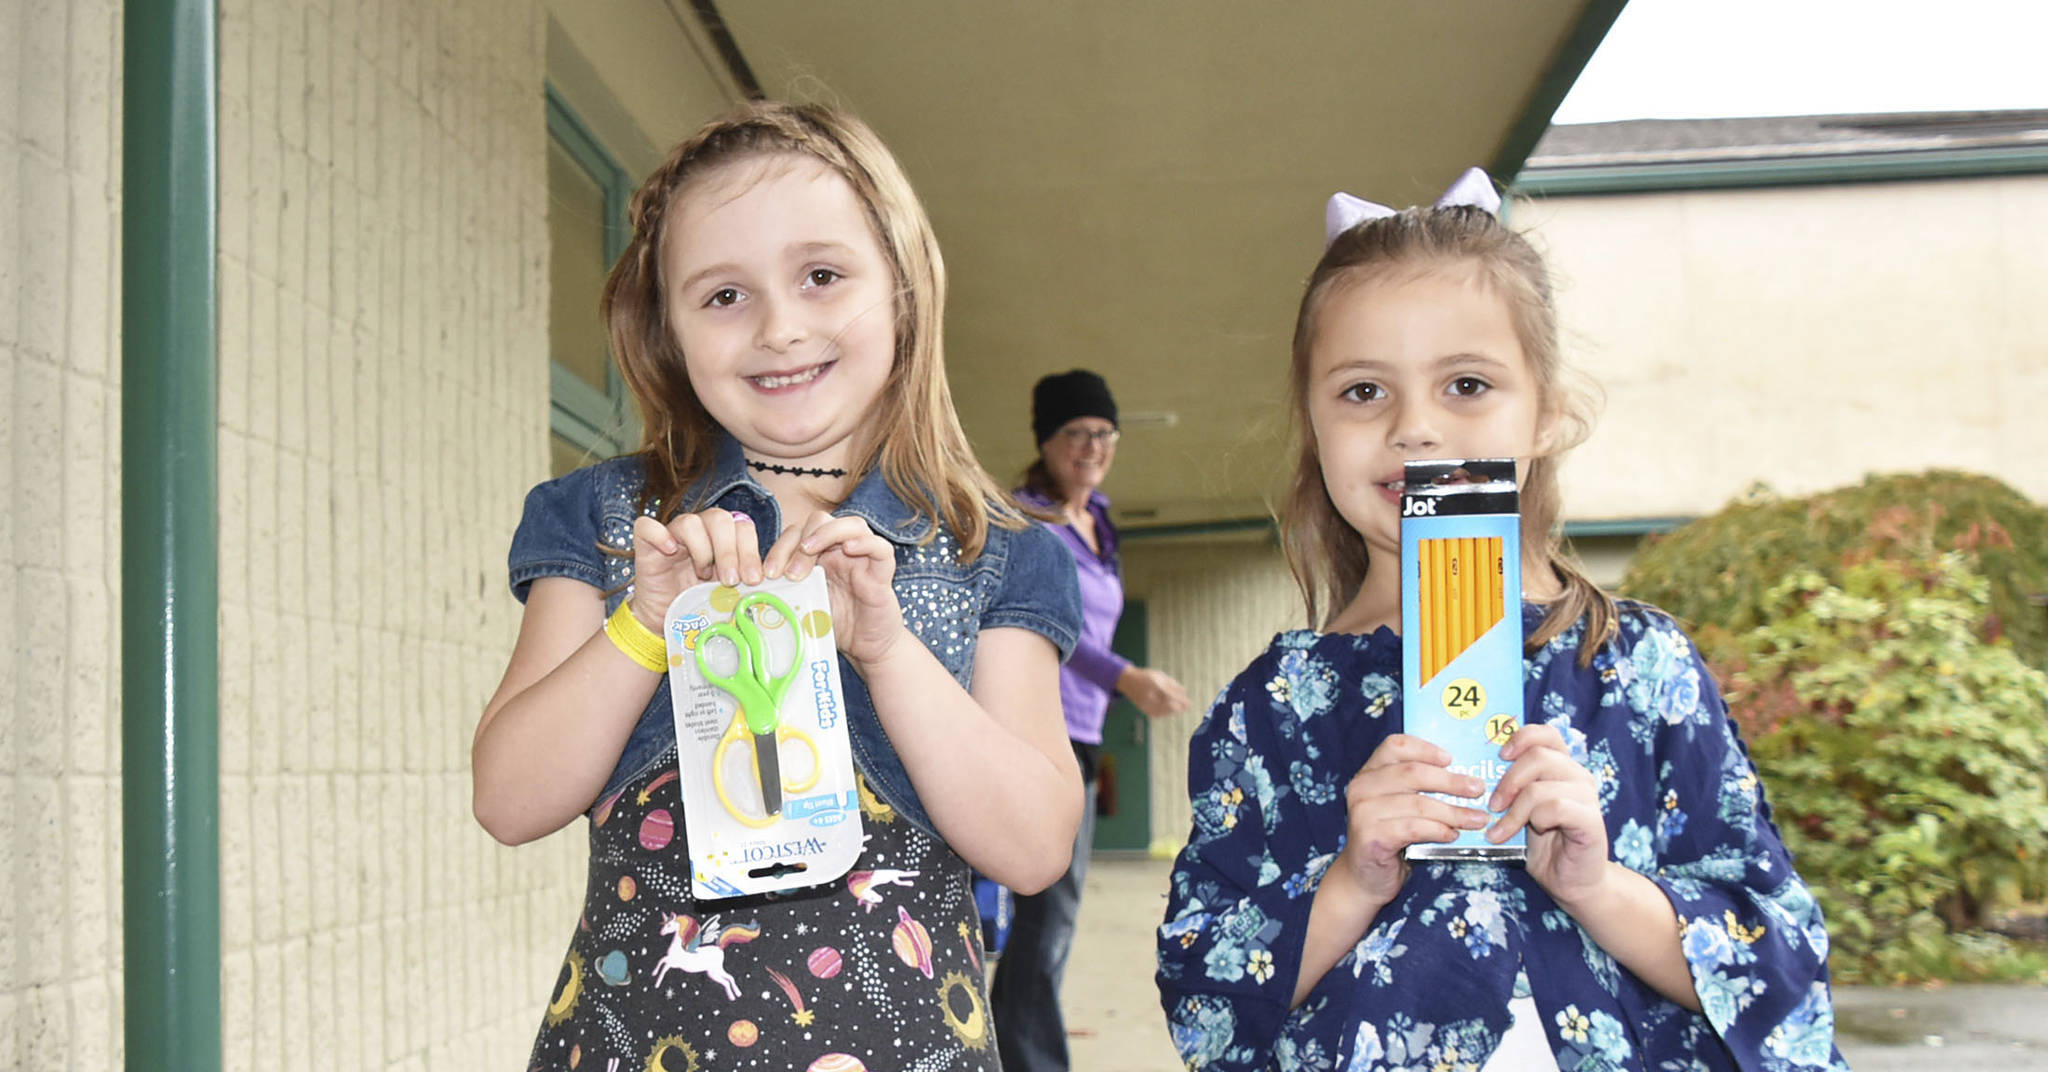 Kent Prairie Elementary kindergartners Jade Knudson and Lillyann Brogan show some of the school supplies the students have gathered over the past month that are being donated to children in Uganda.